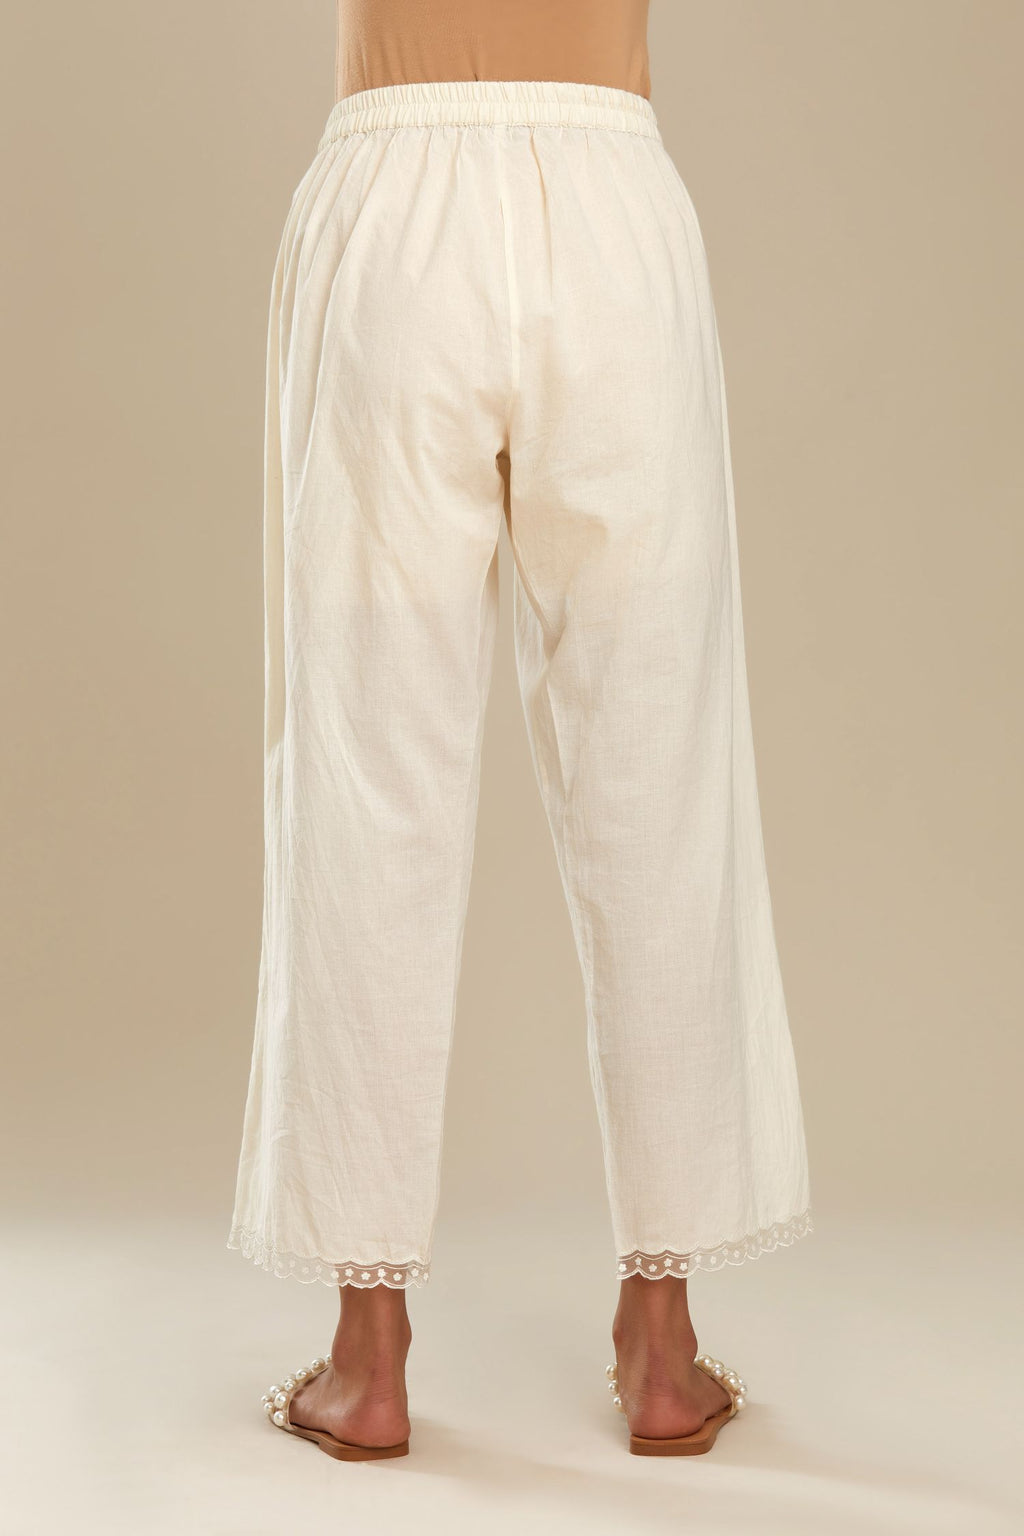 Off white straight pants with scalloped embroidery at bottom hem. (Pants)